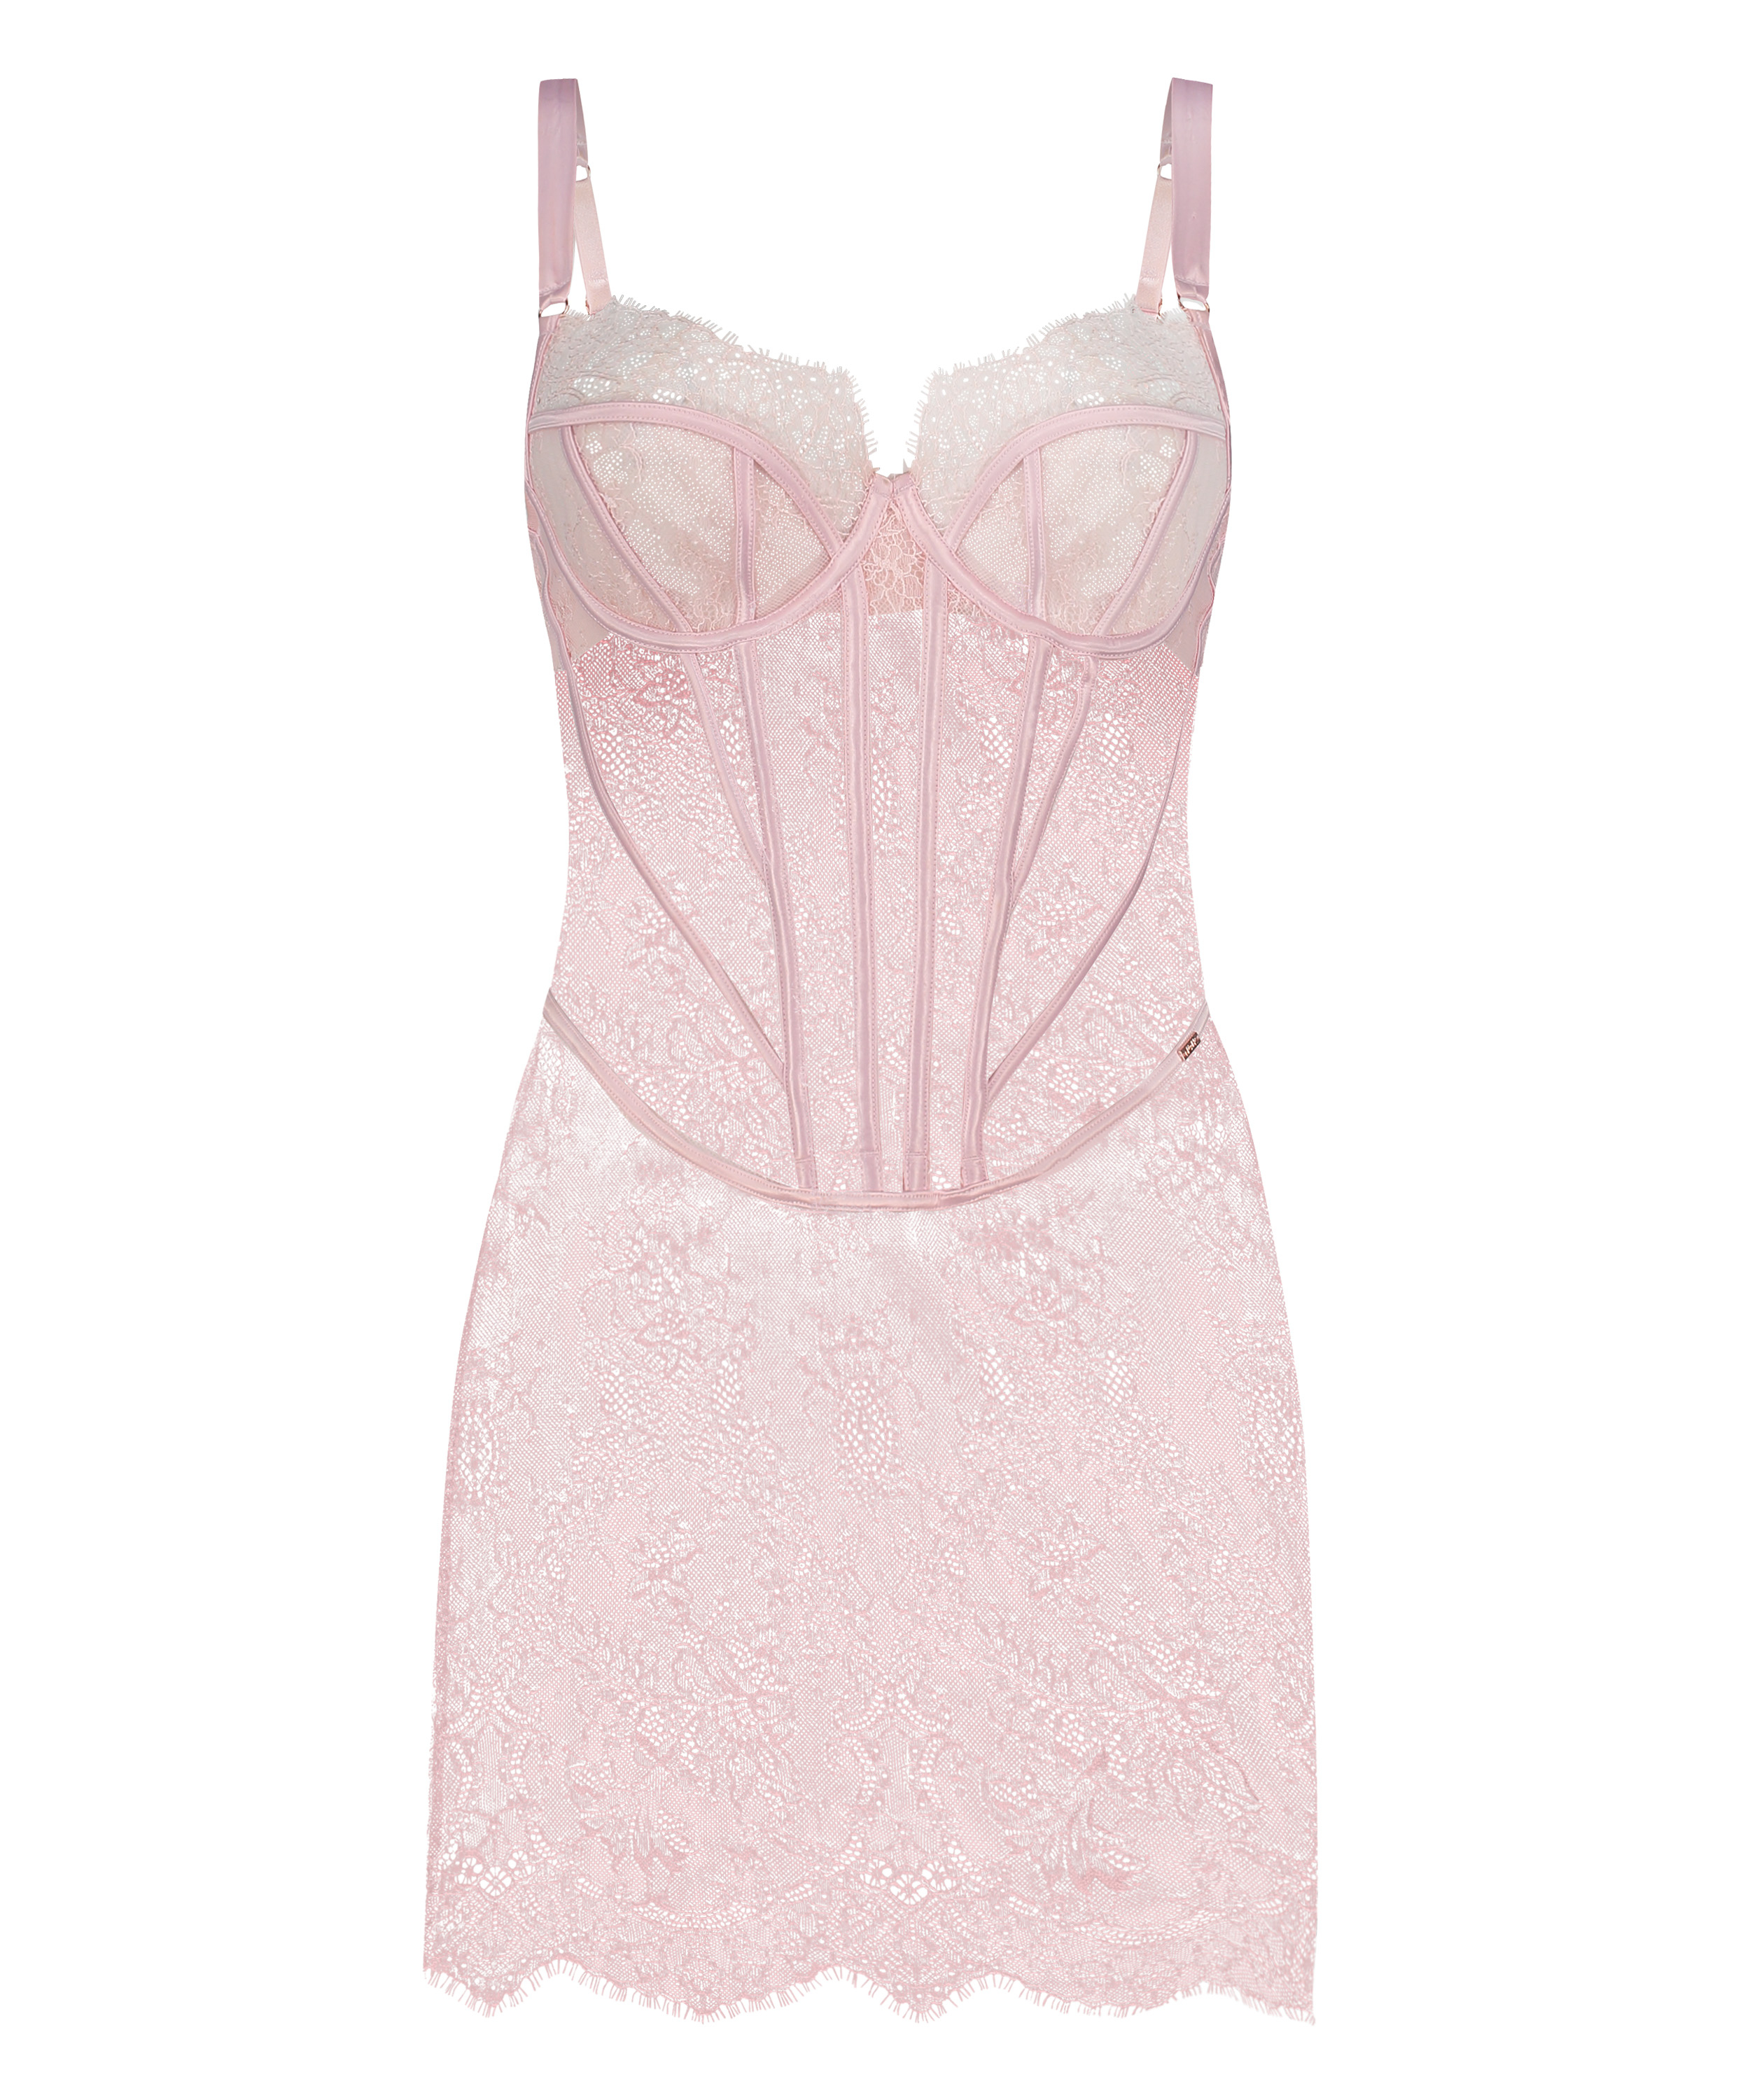 Lace Camille Slip dress, Pink, main